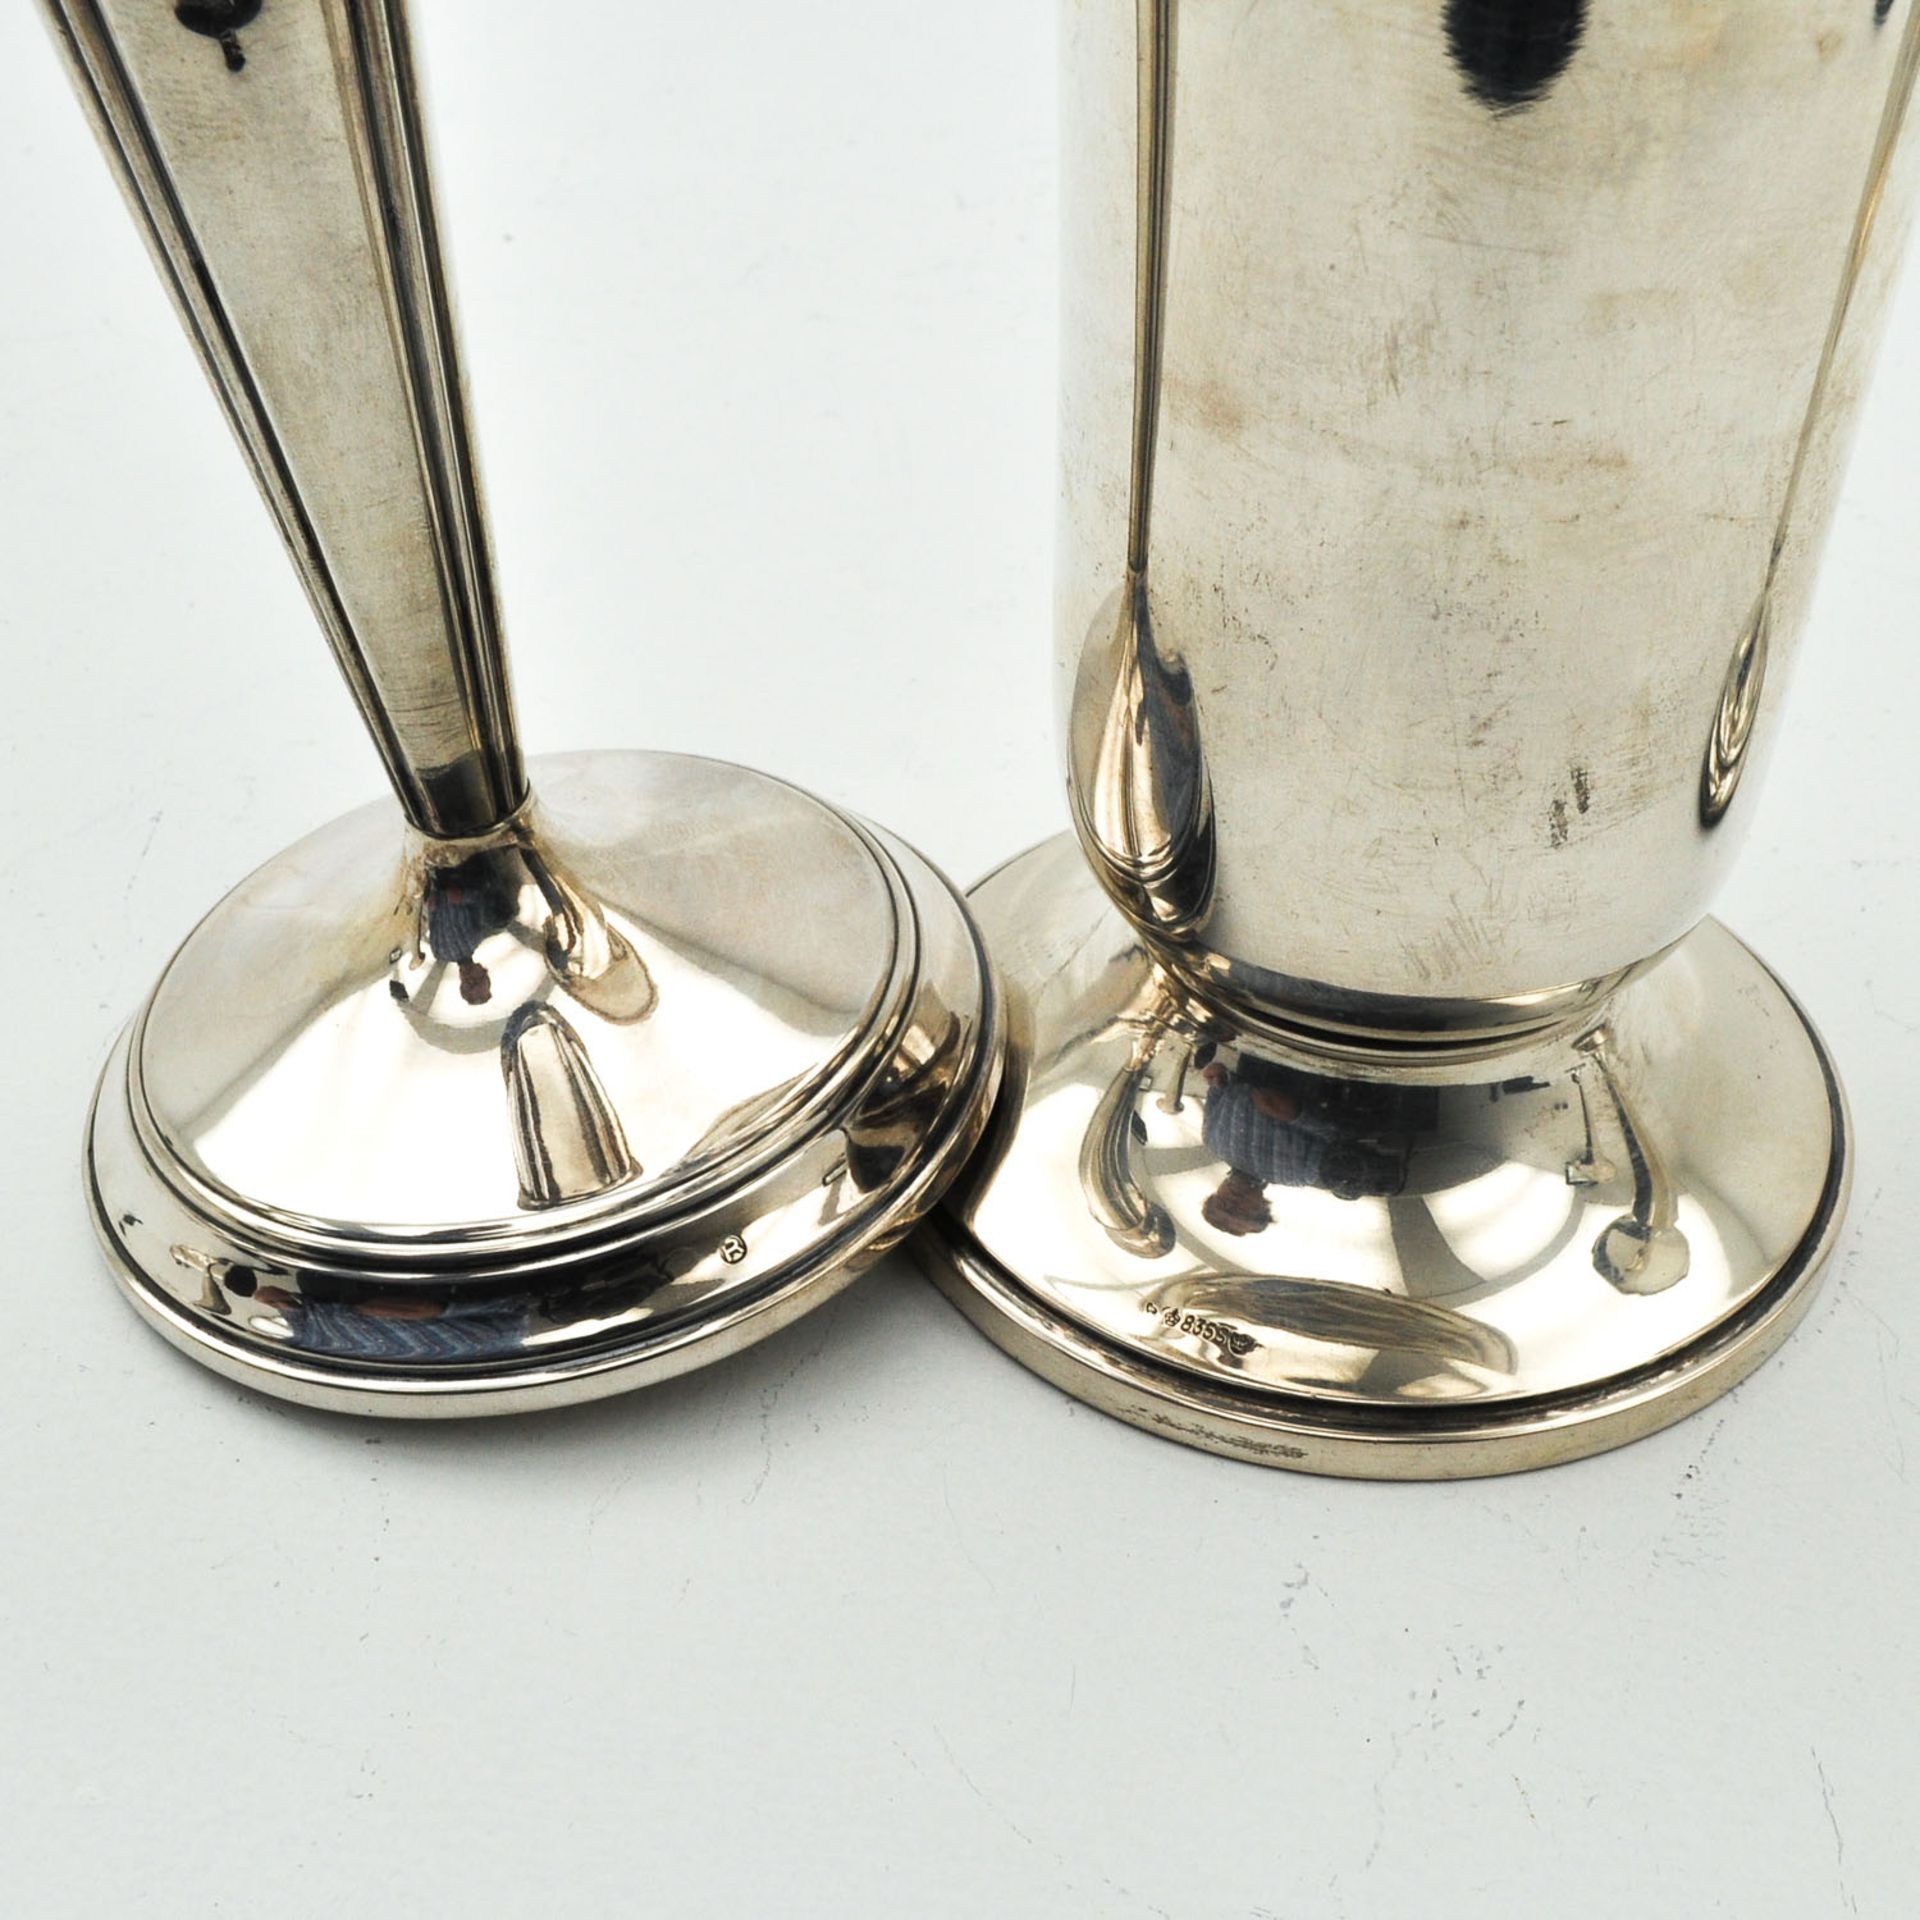 A Collection of Vases and Candlesticks - Image 7 of 8